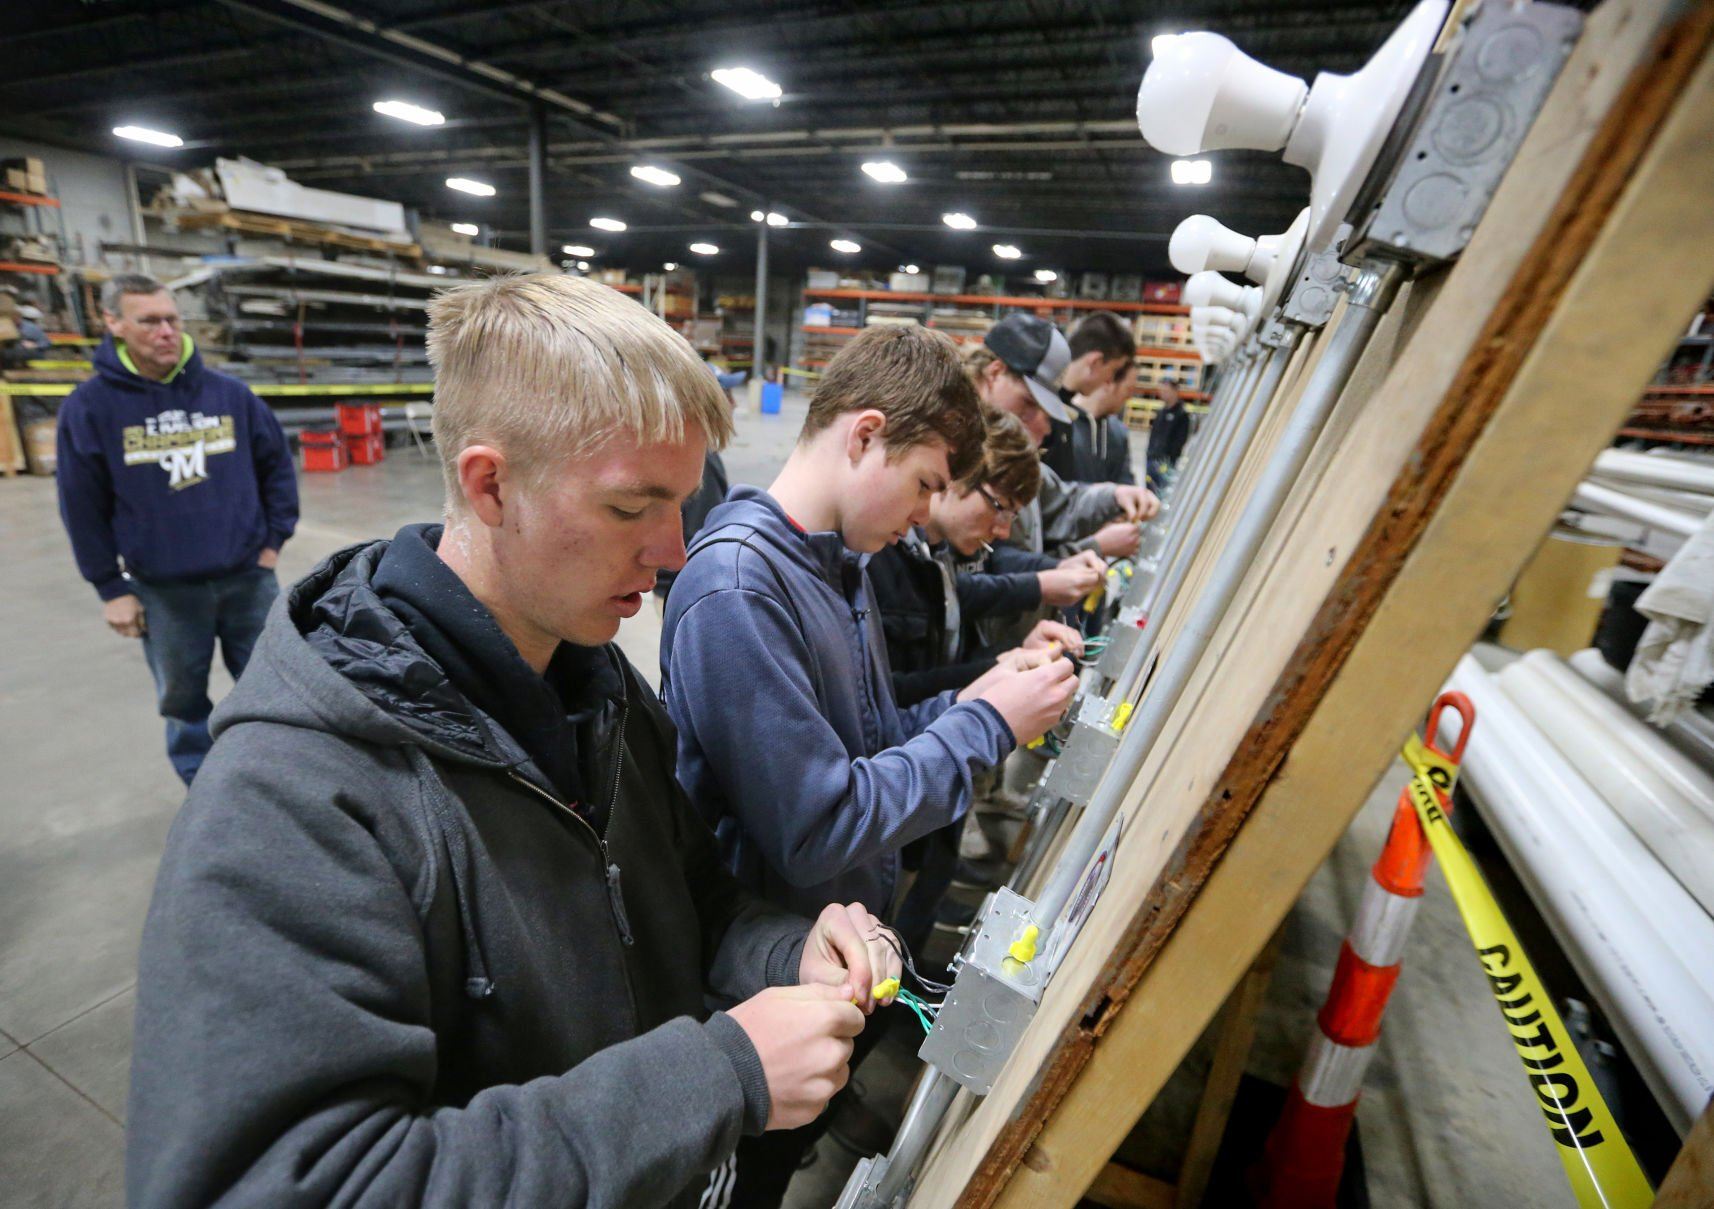 Gabe Mennig (left), 18, of Platteville, Wis., works to splice a junction box during the Construction Industry Career Expo at Portzen Construction in Dubuque on Thursday, April 28, 2022.    PHOTO CREDIT: JESSICA REILLY